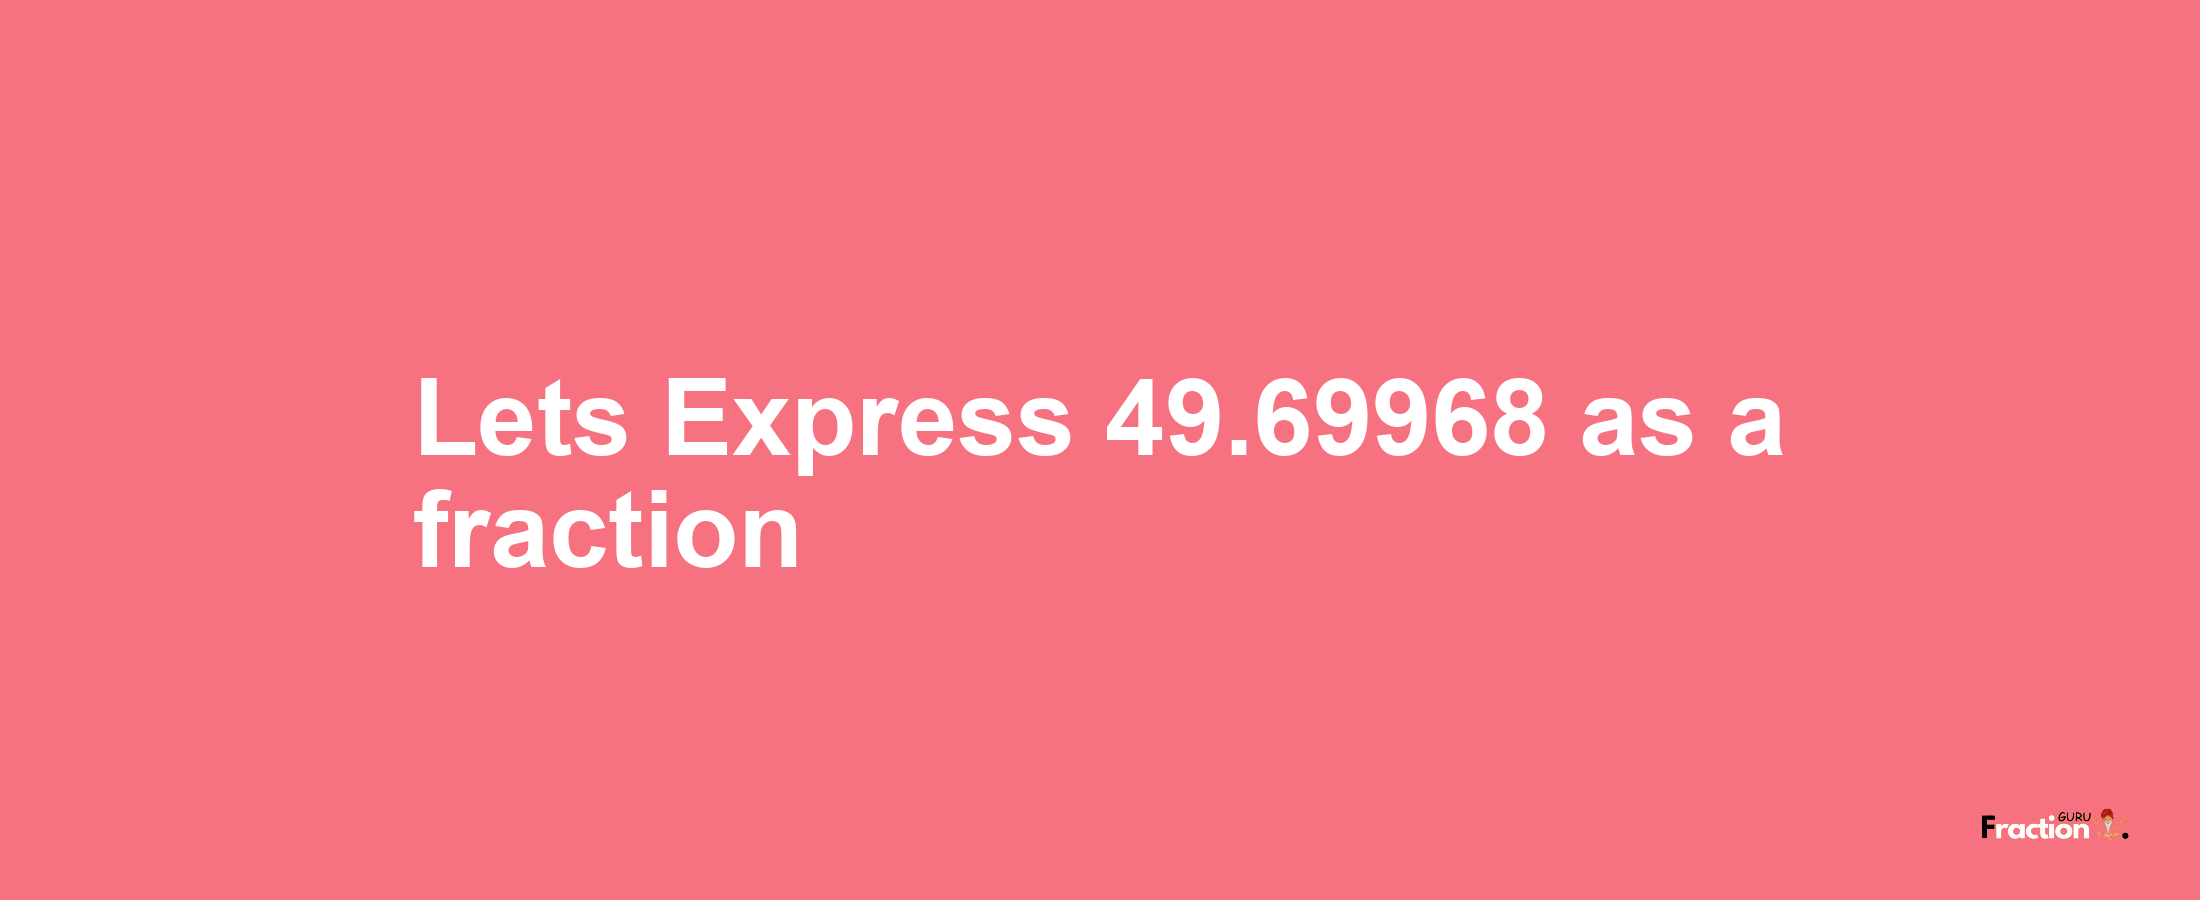 Lets Express 49.69968 as afraction